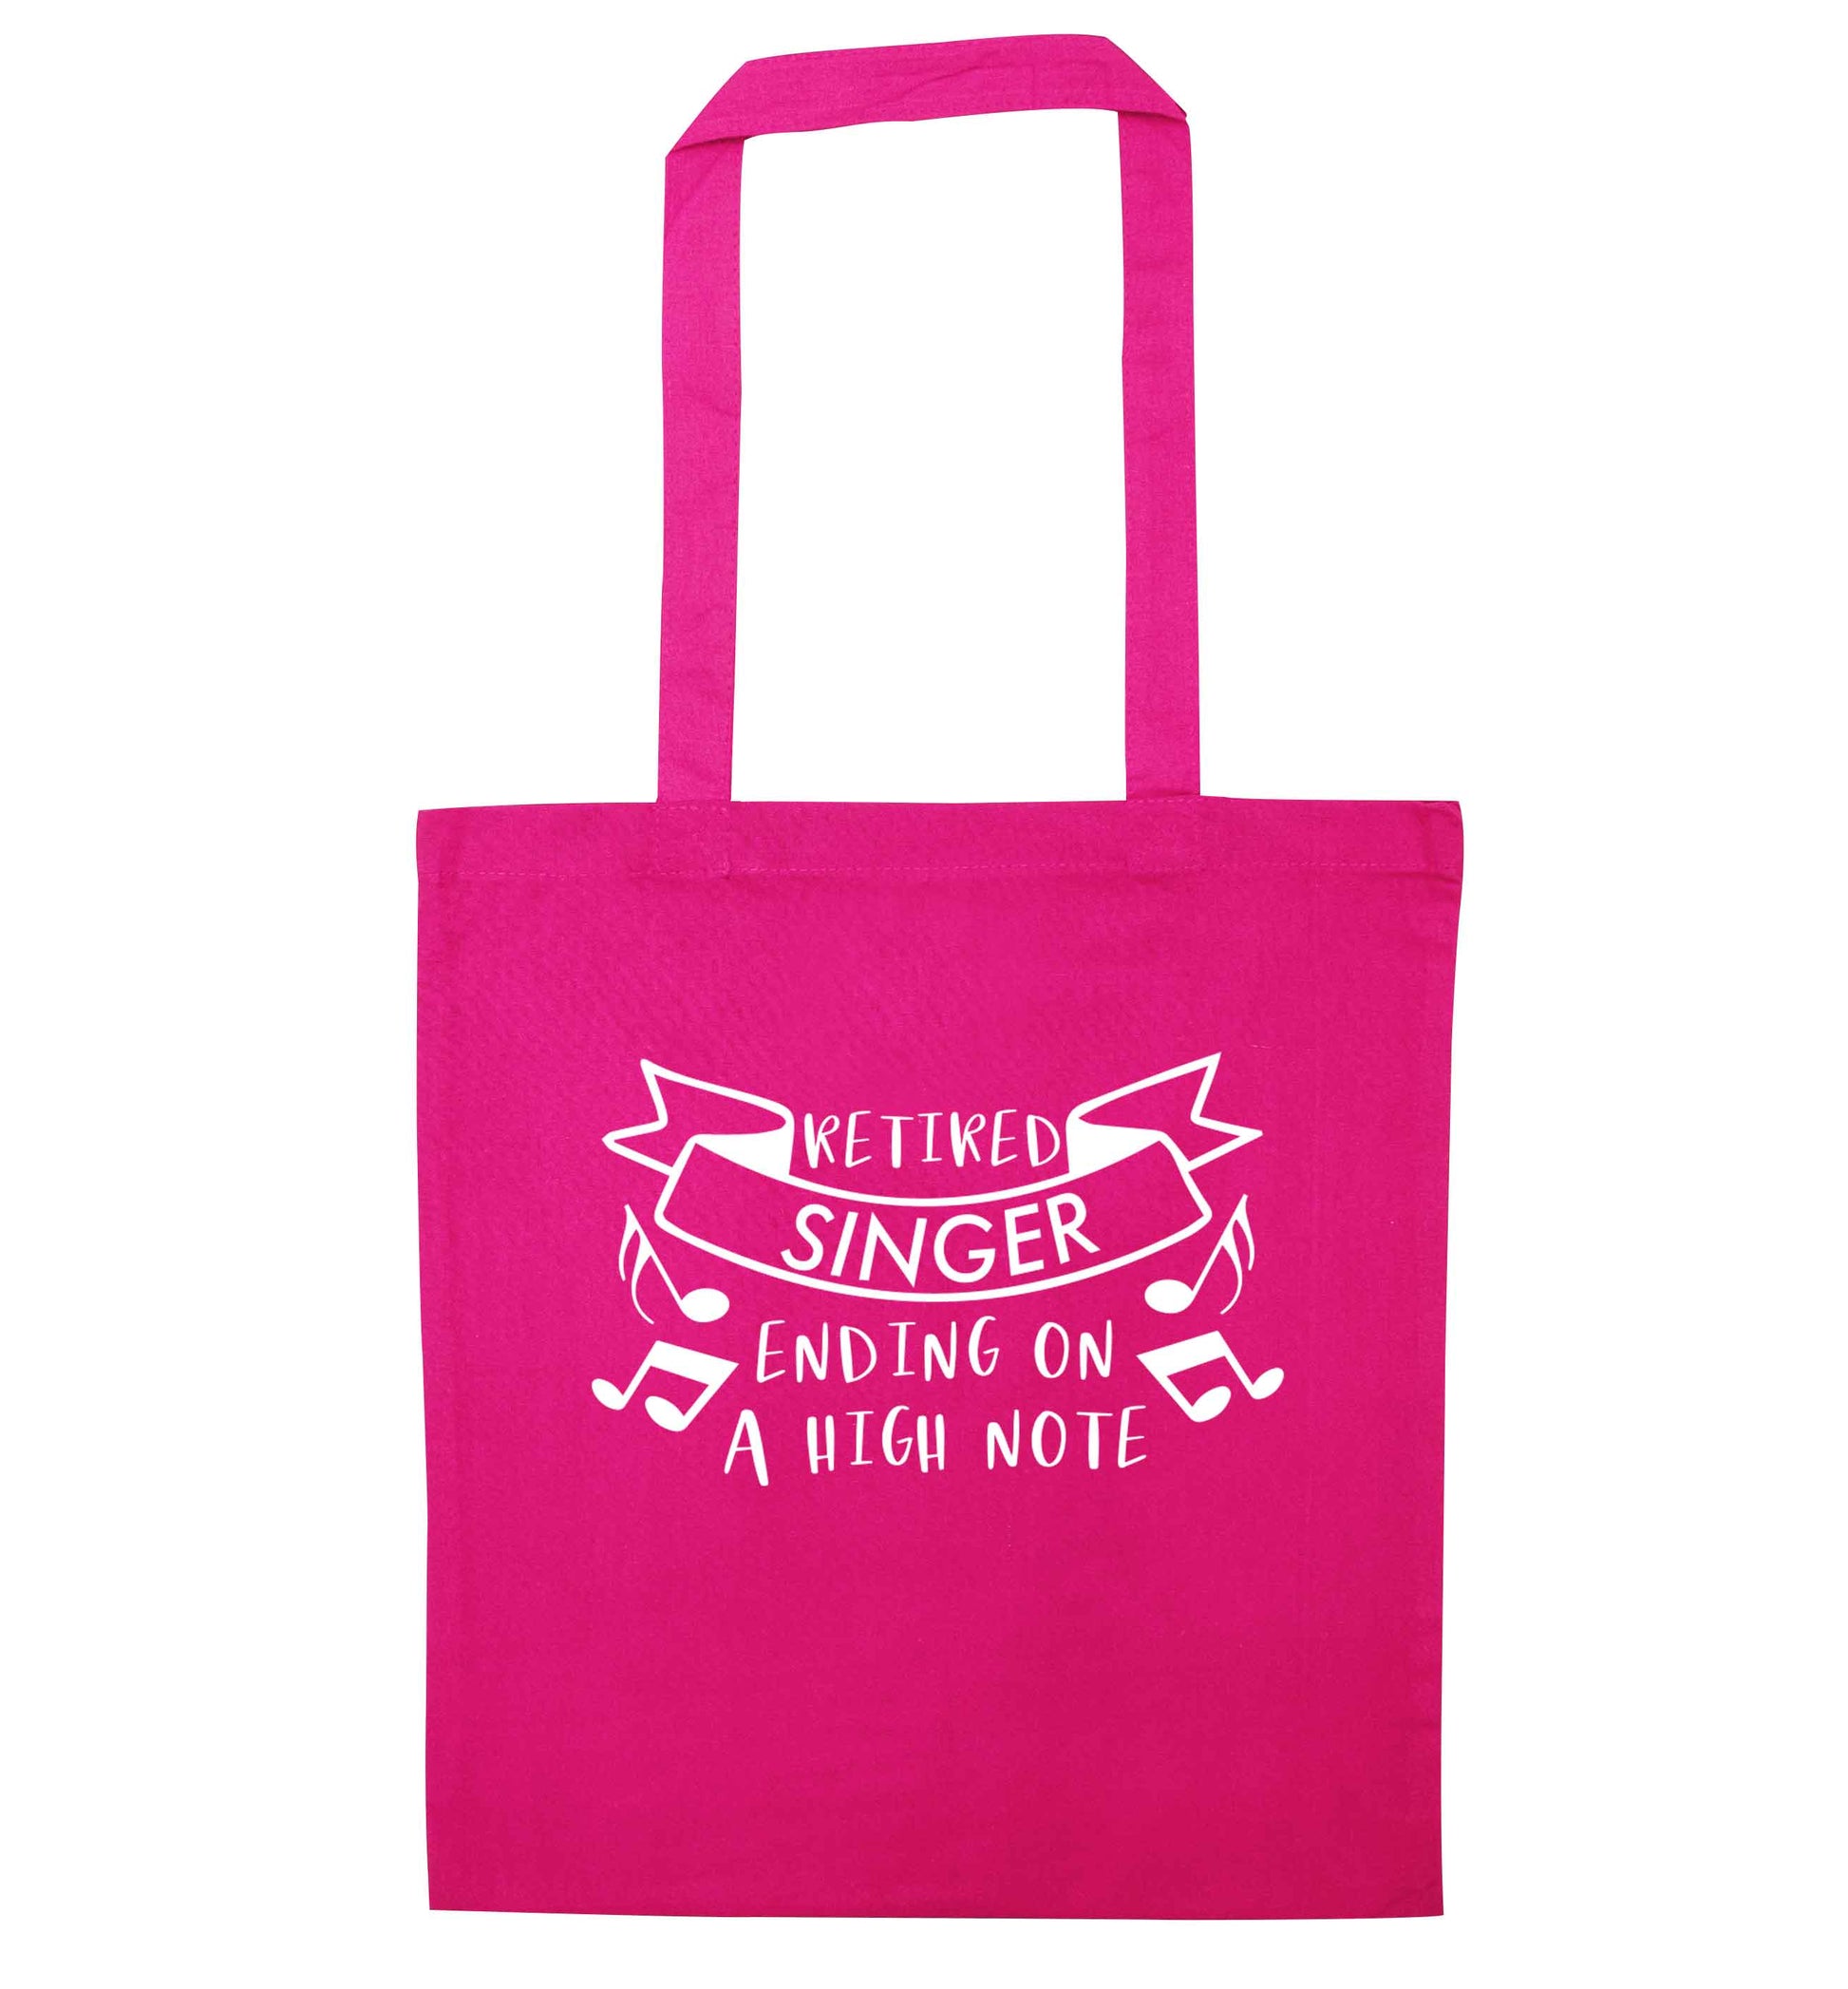 Retired singer ending on a high note pink tote bag